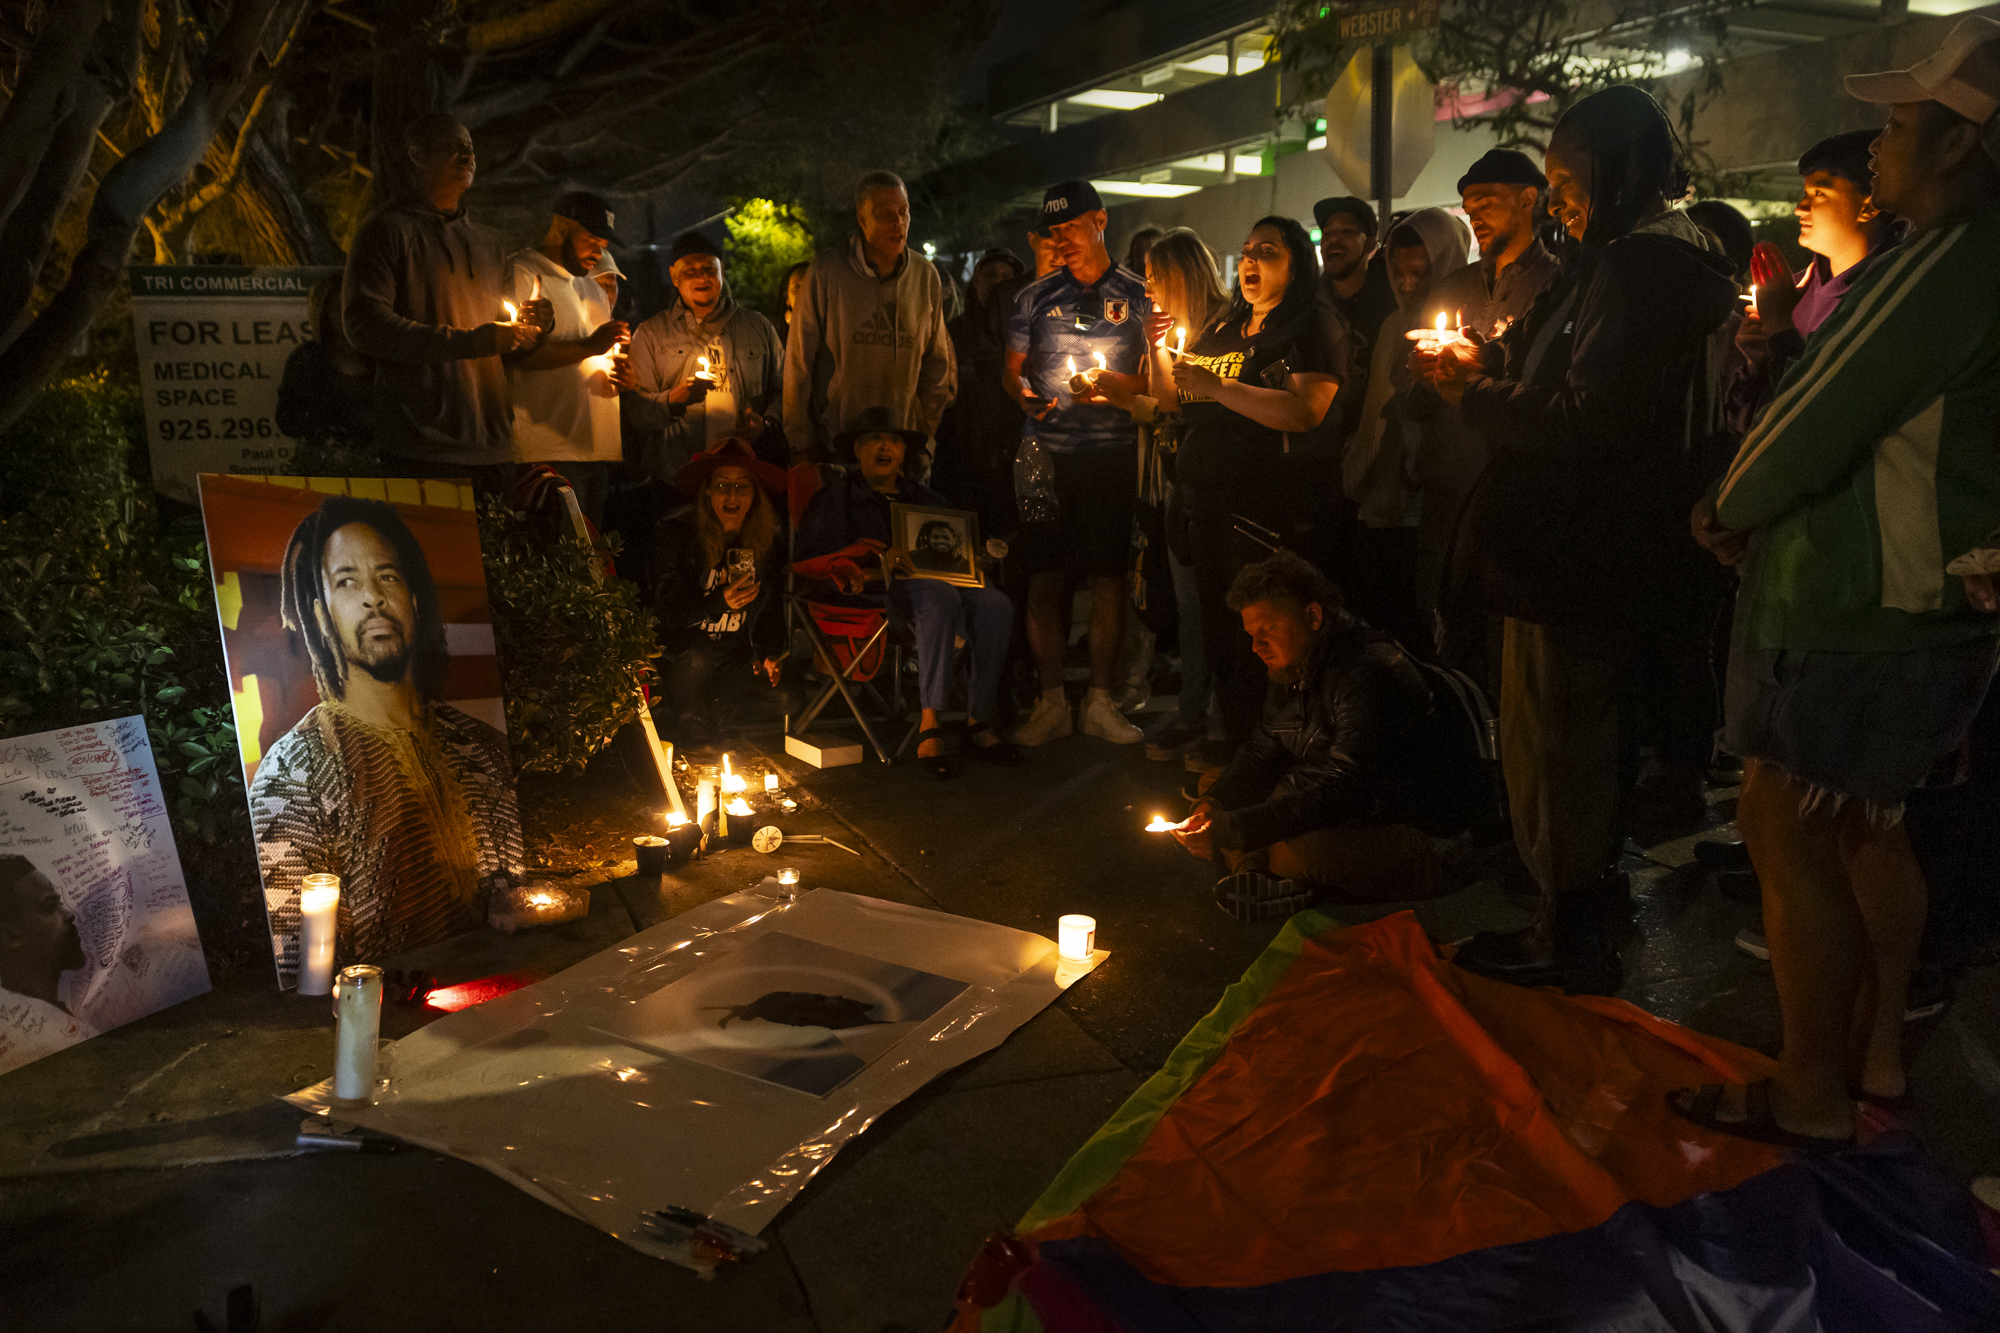 A group of people gather, holding candles and singing around the photo of a person with long hair and a goatee.